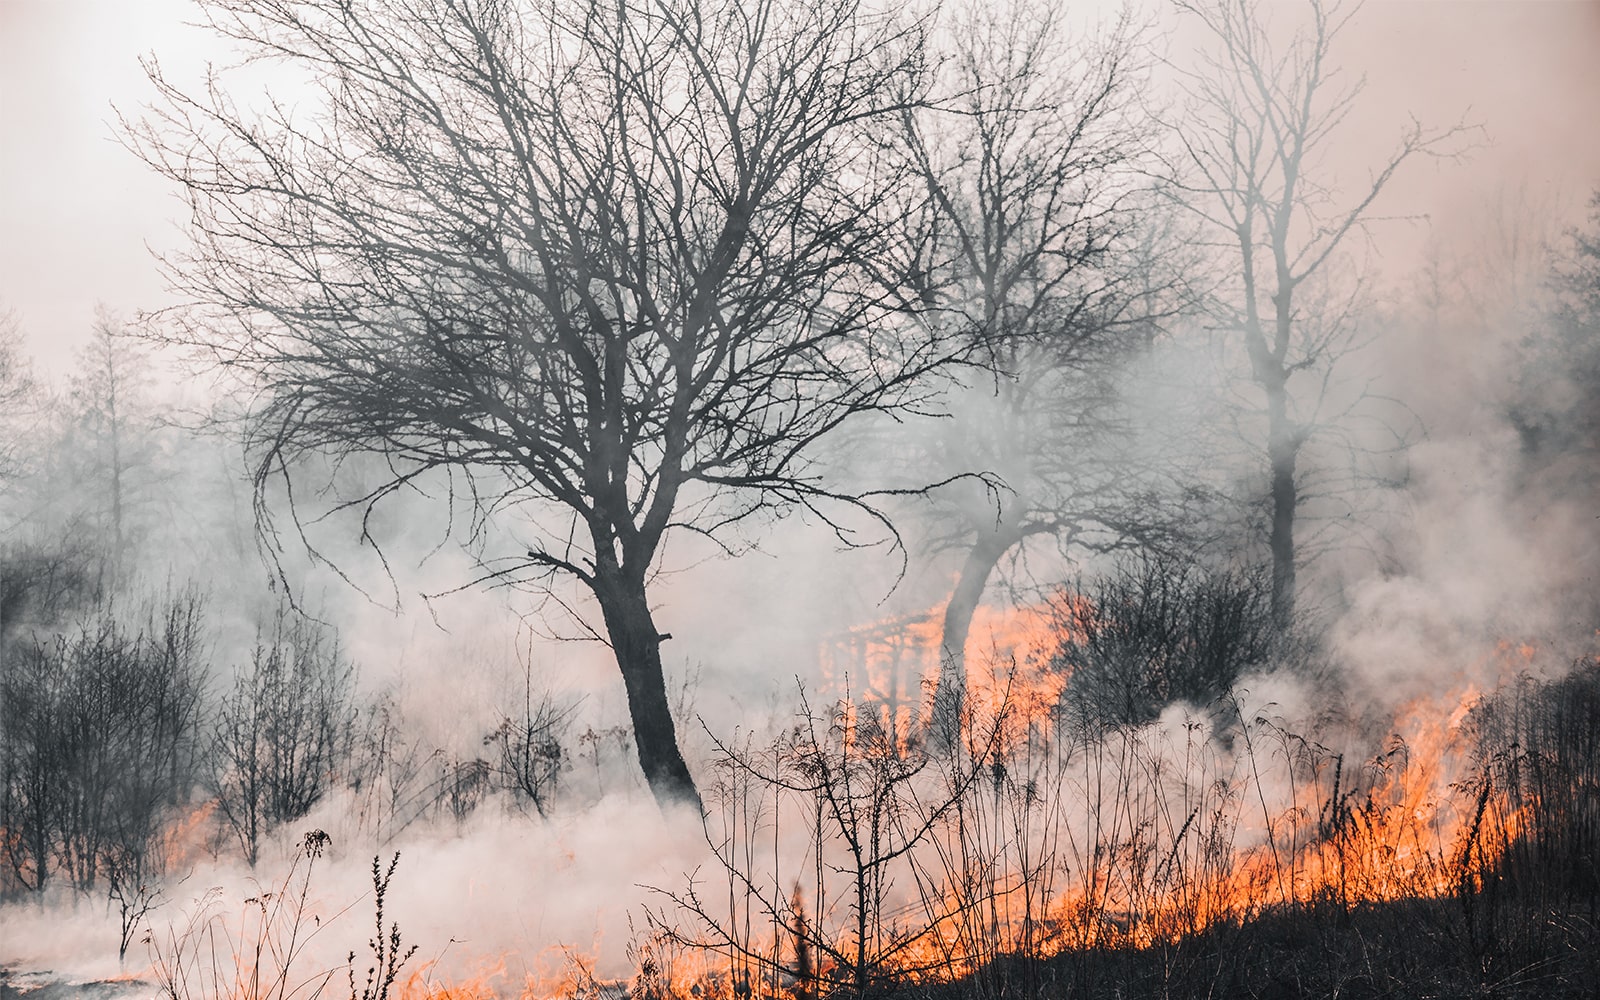 wildfires and health effects